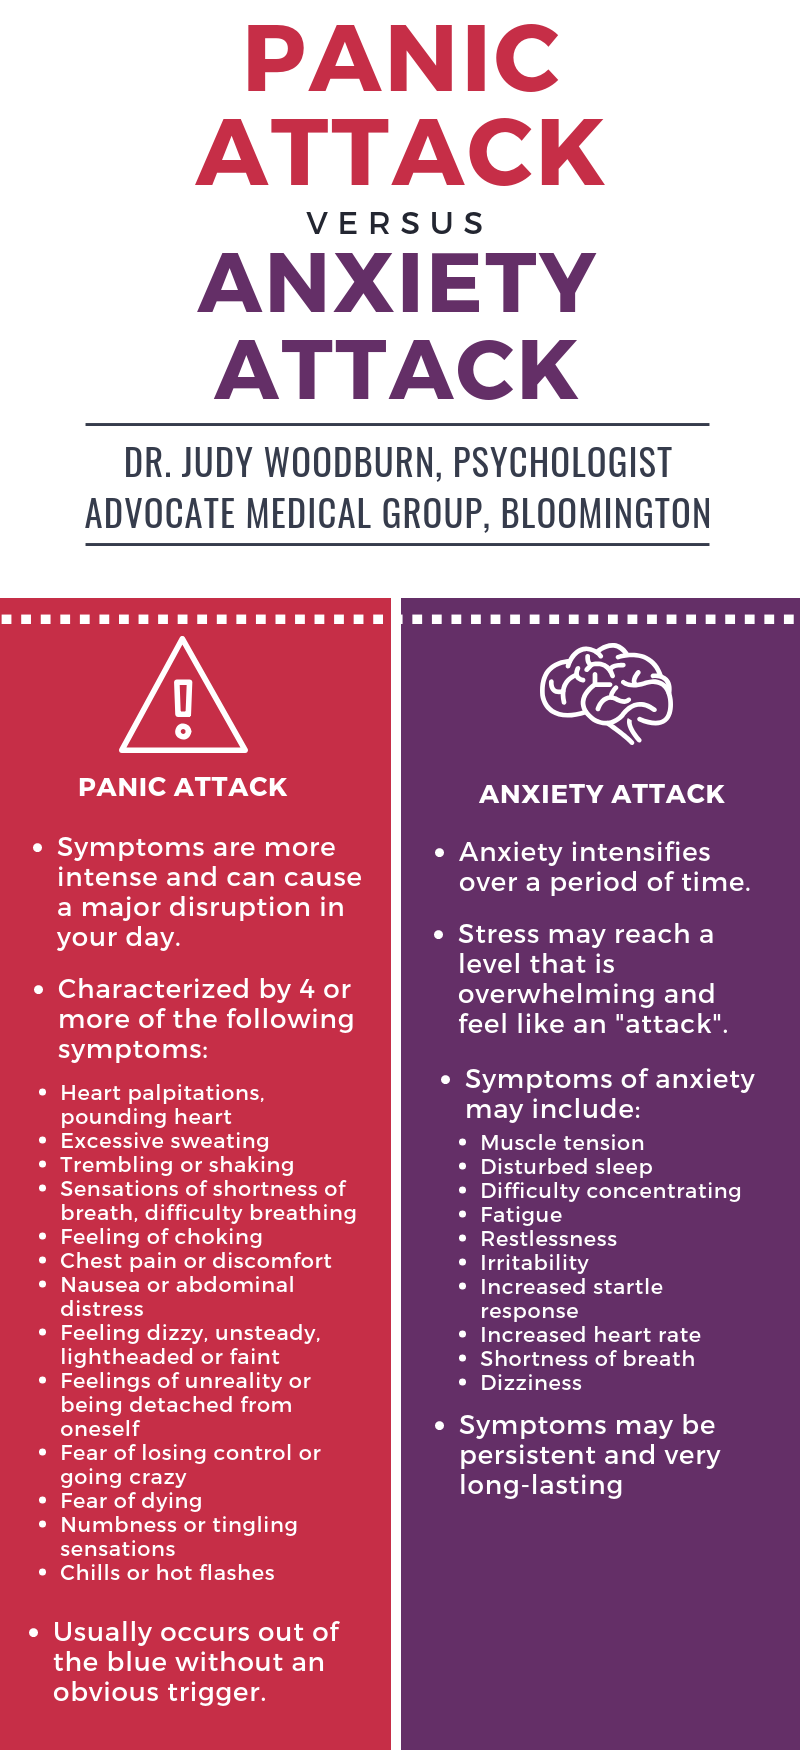 Anxiety attack symptoms